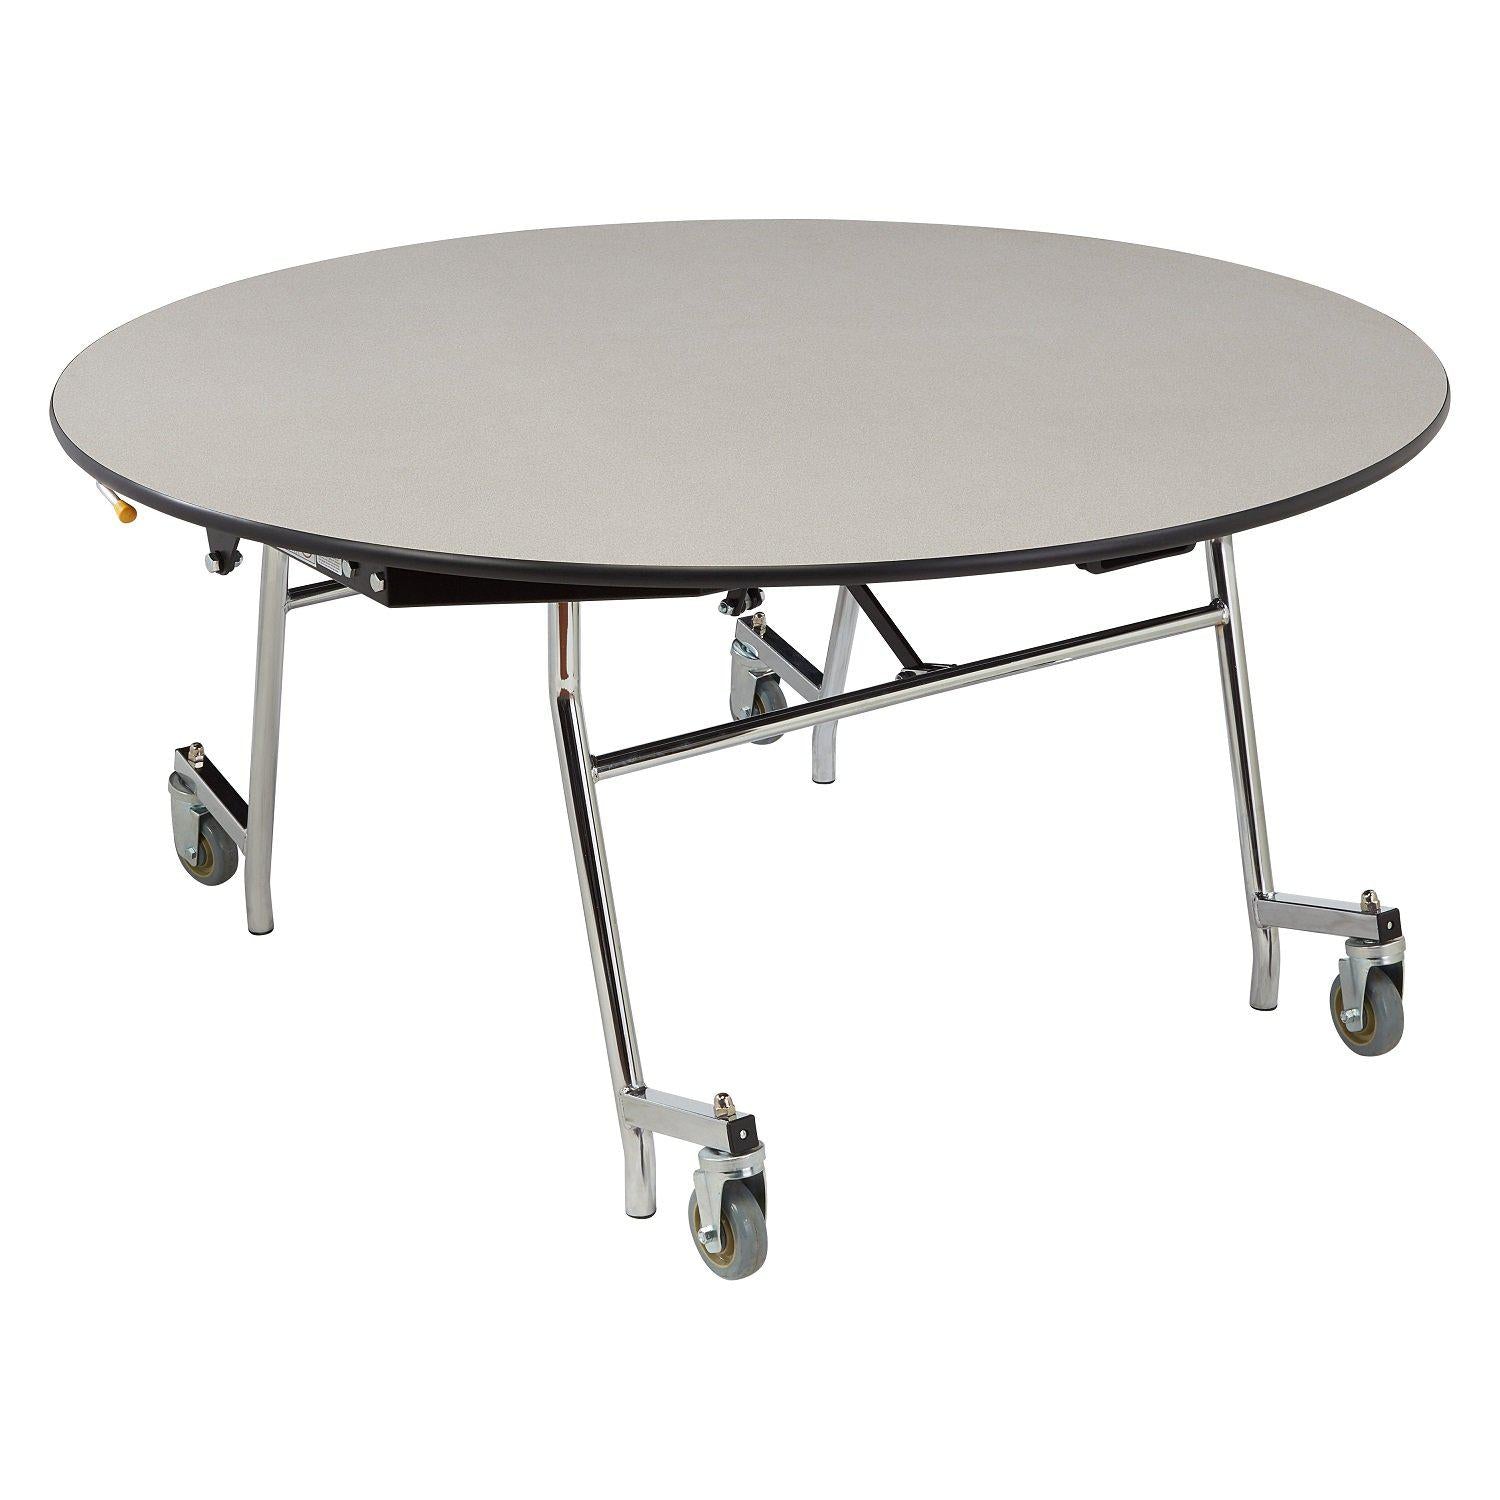 Mobile EasyFold Table, 48" Round, Particleboard Core, Vinyl T-Mold Edge, Chrome Frame